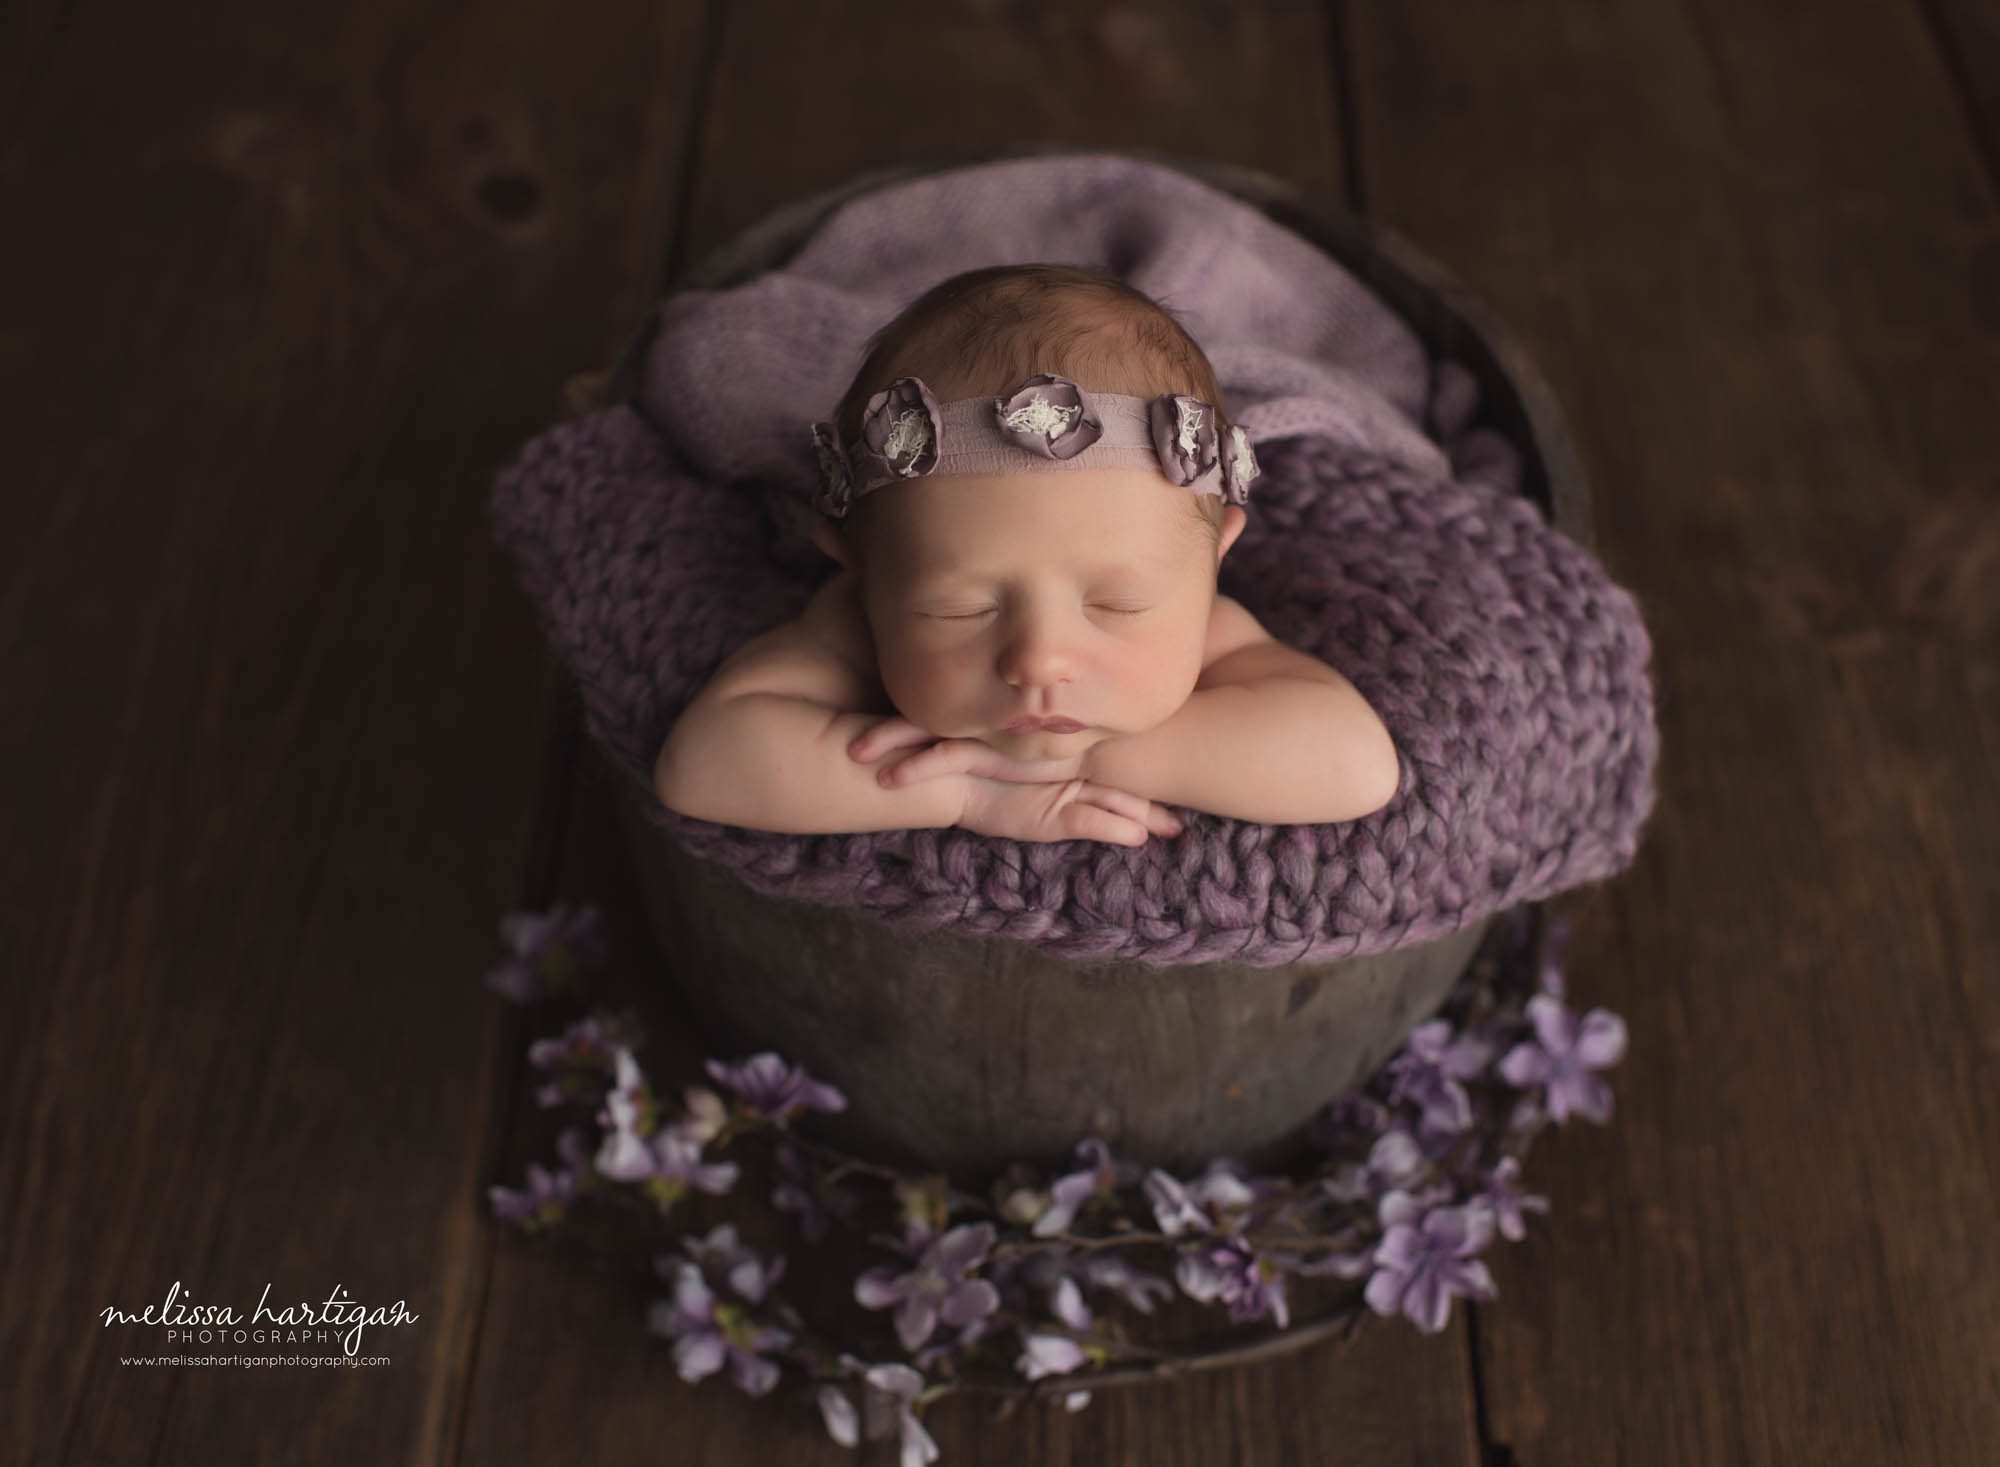 Baby girl posed in bucket with head resting on hands purple flowers placed around the bucket CT newborn Photographer